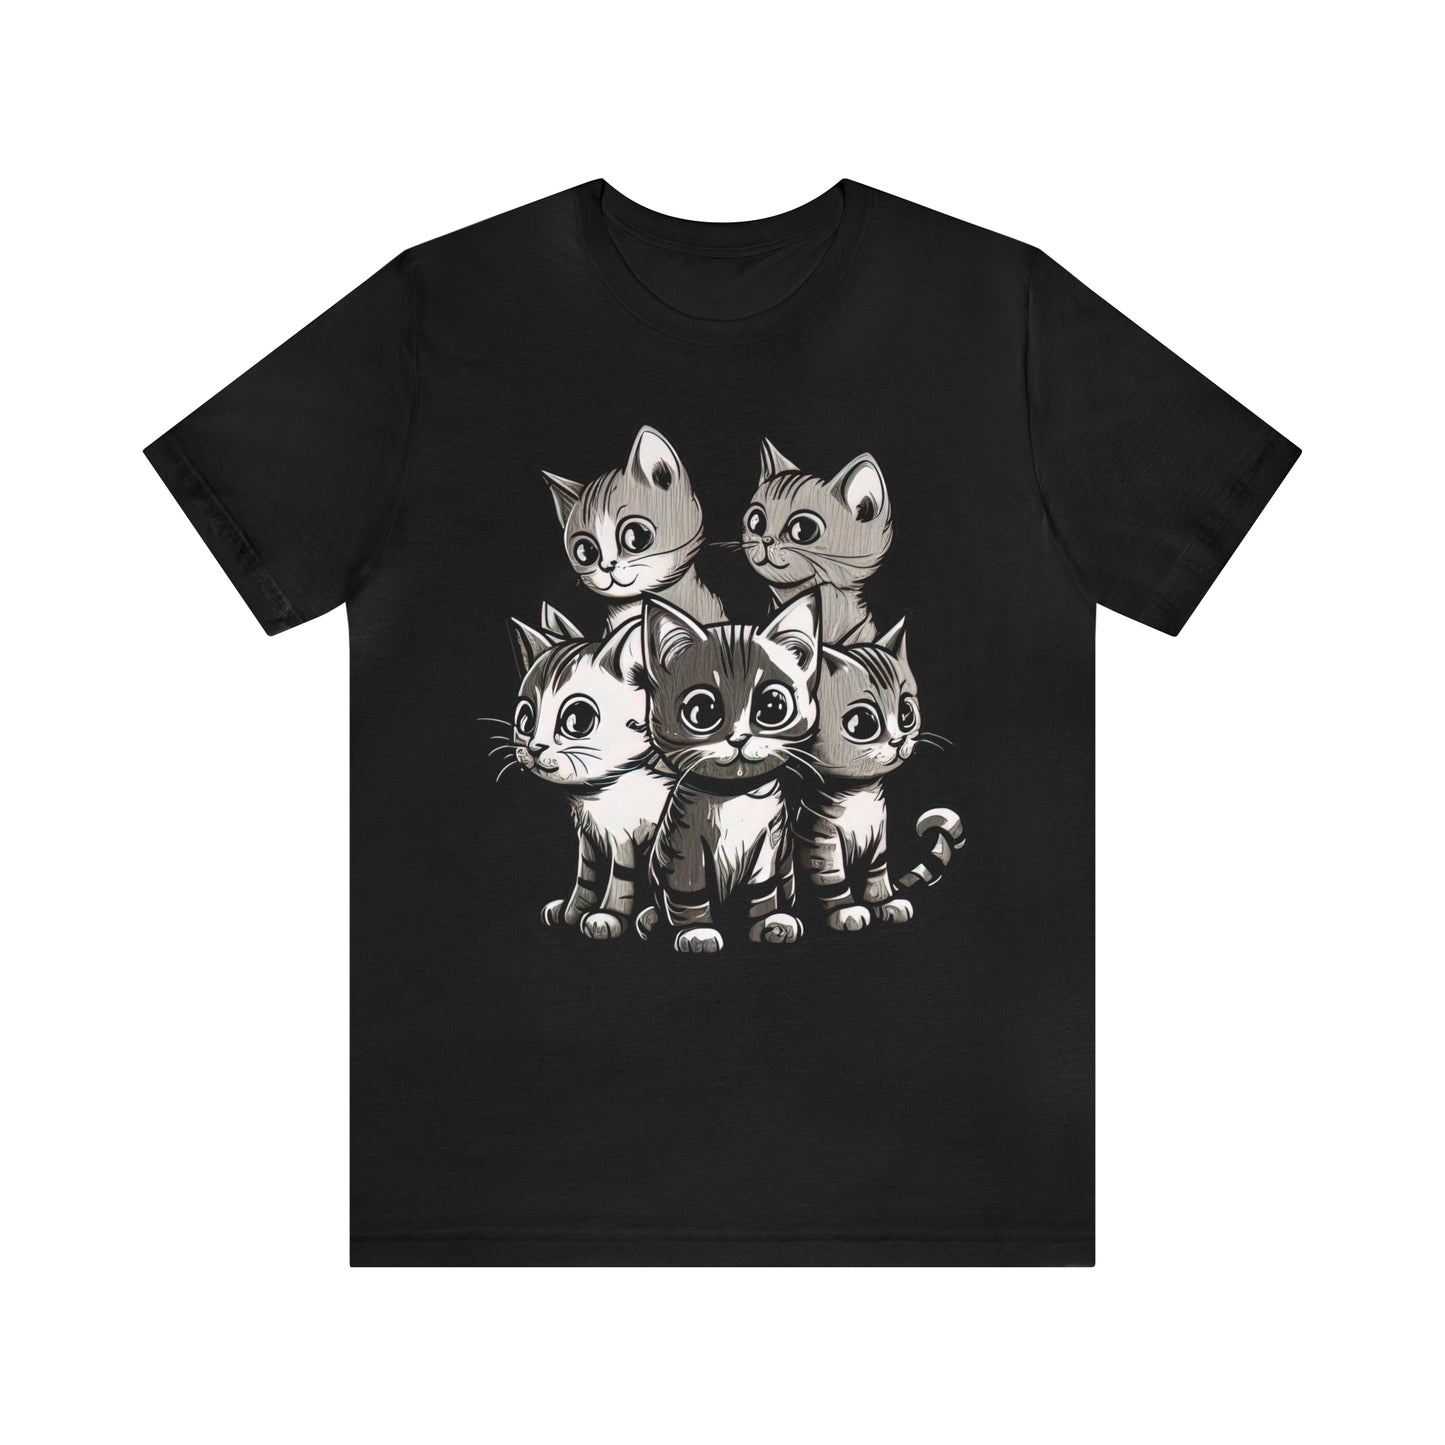 psychedelicBRANDz's Nocturnal Whisker Symphony featuring a group of cats on a black shirt